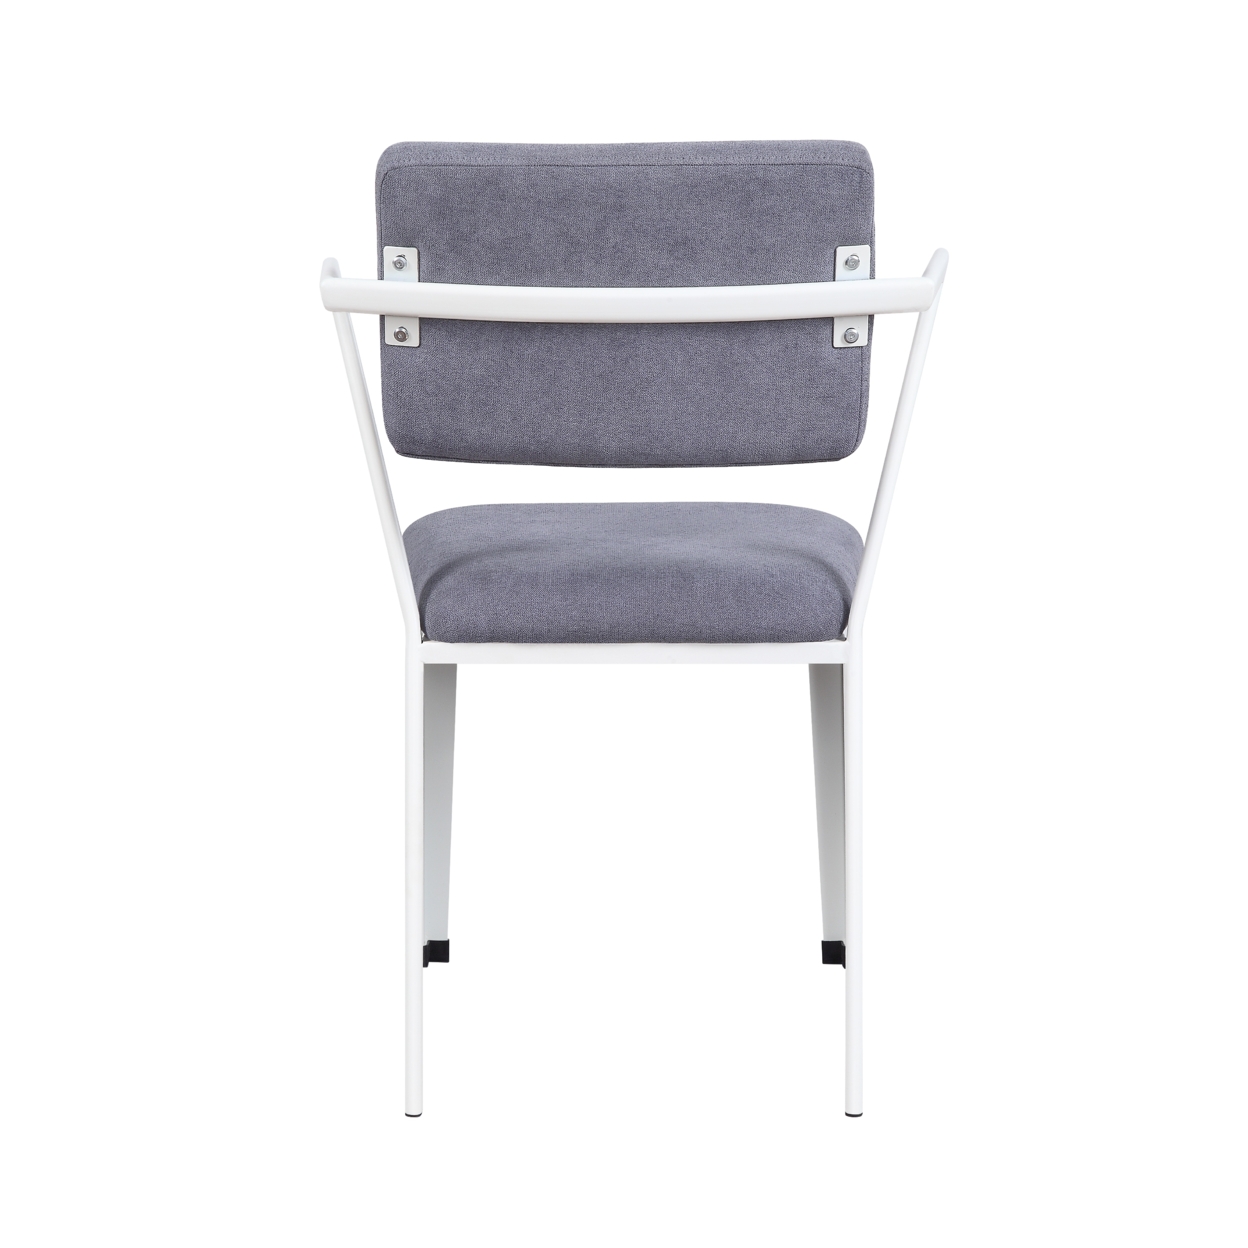 Metal Chair With Fabric Upholstery And Straight Legs, Gray And White- Saltoro Sherpi